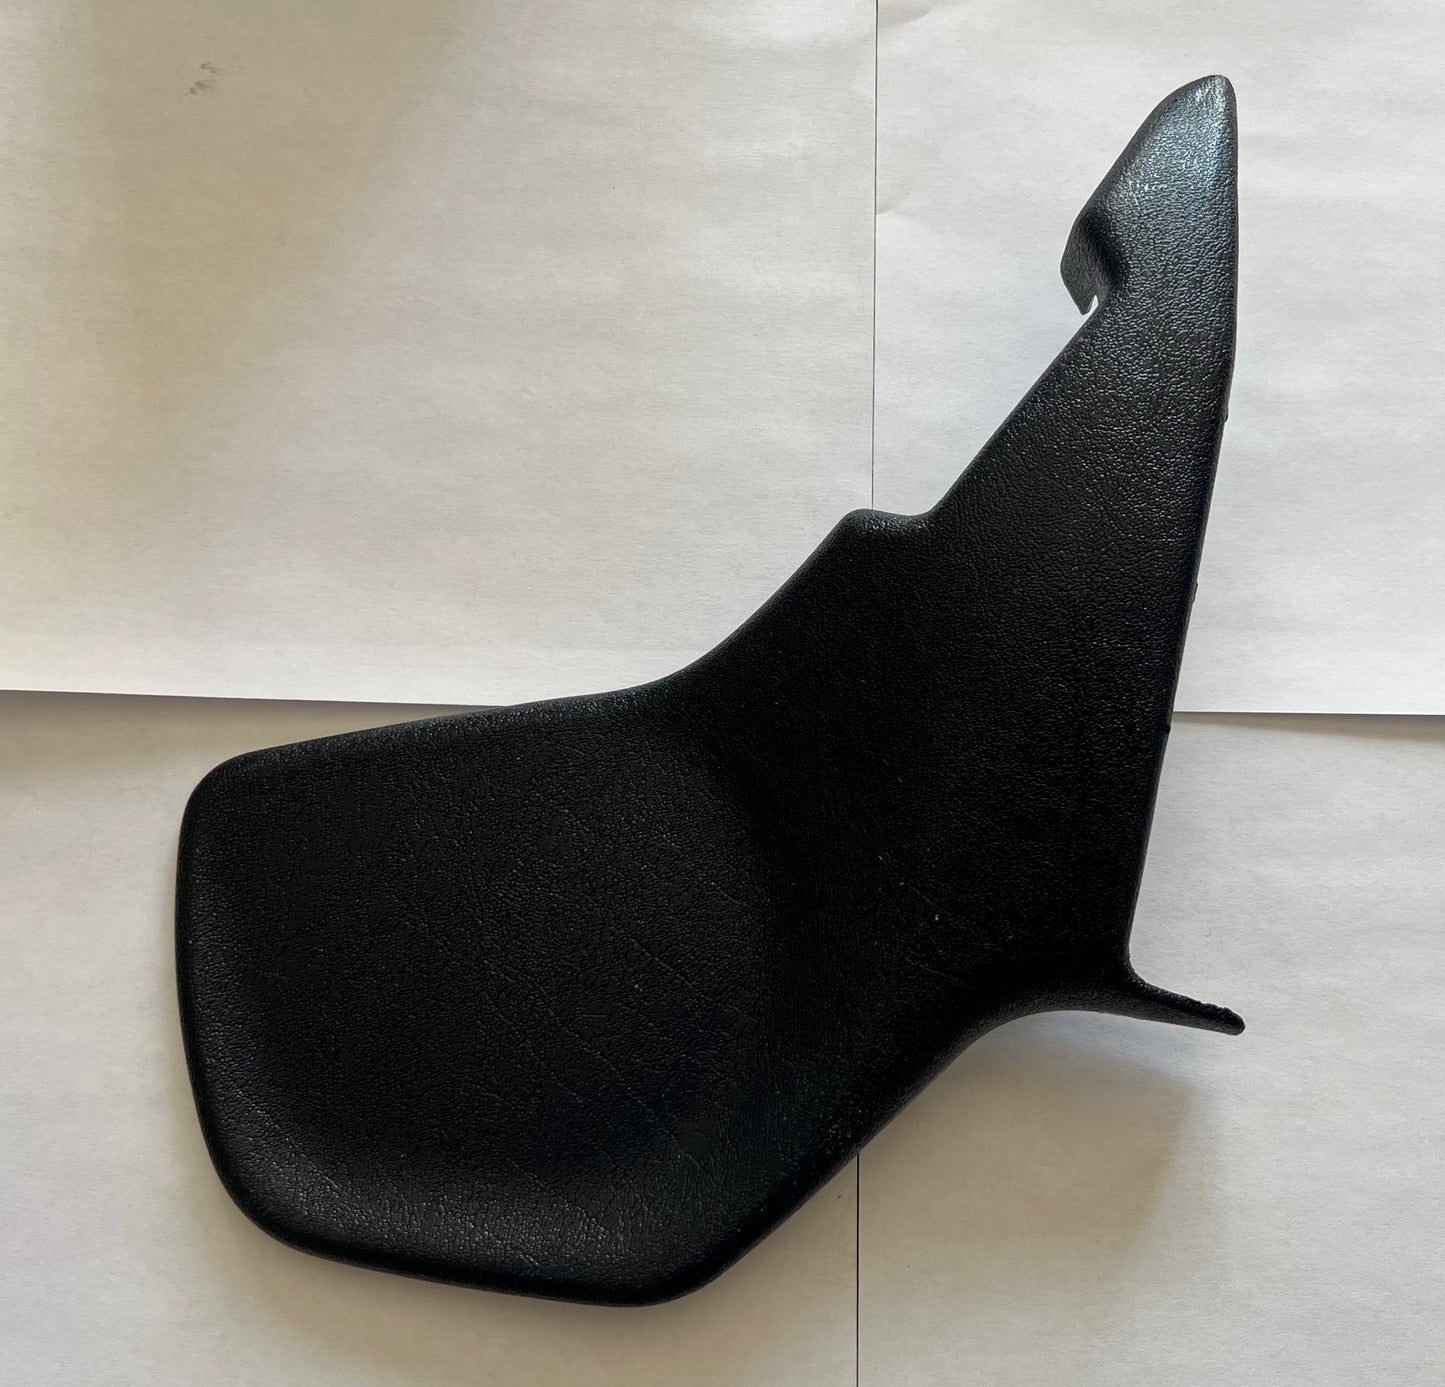 Used Mercedes-Benz Seat Hinge Cover Blue W123